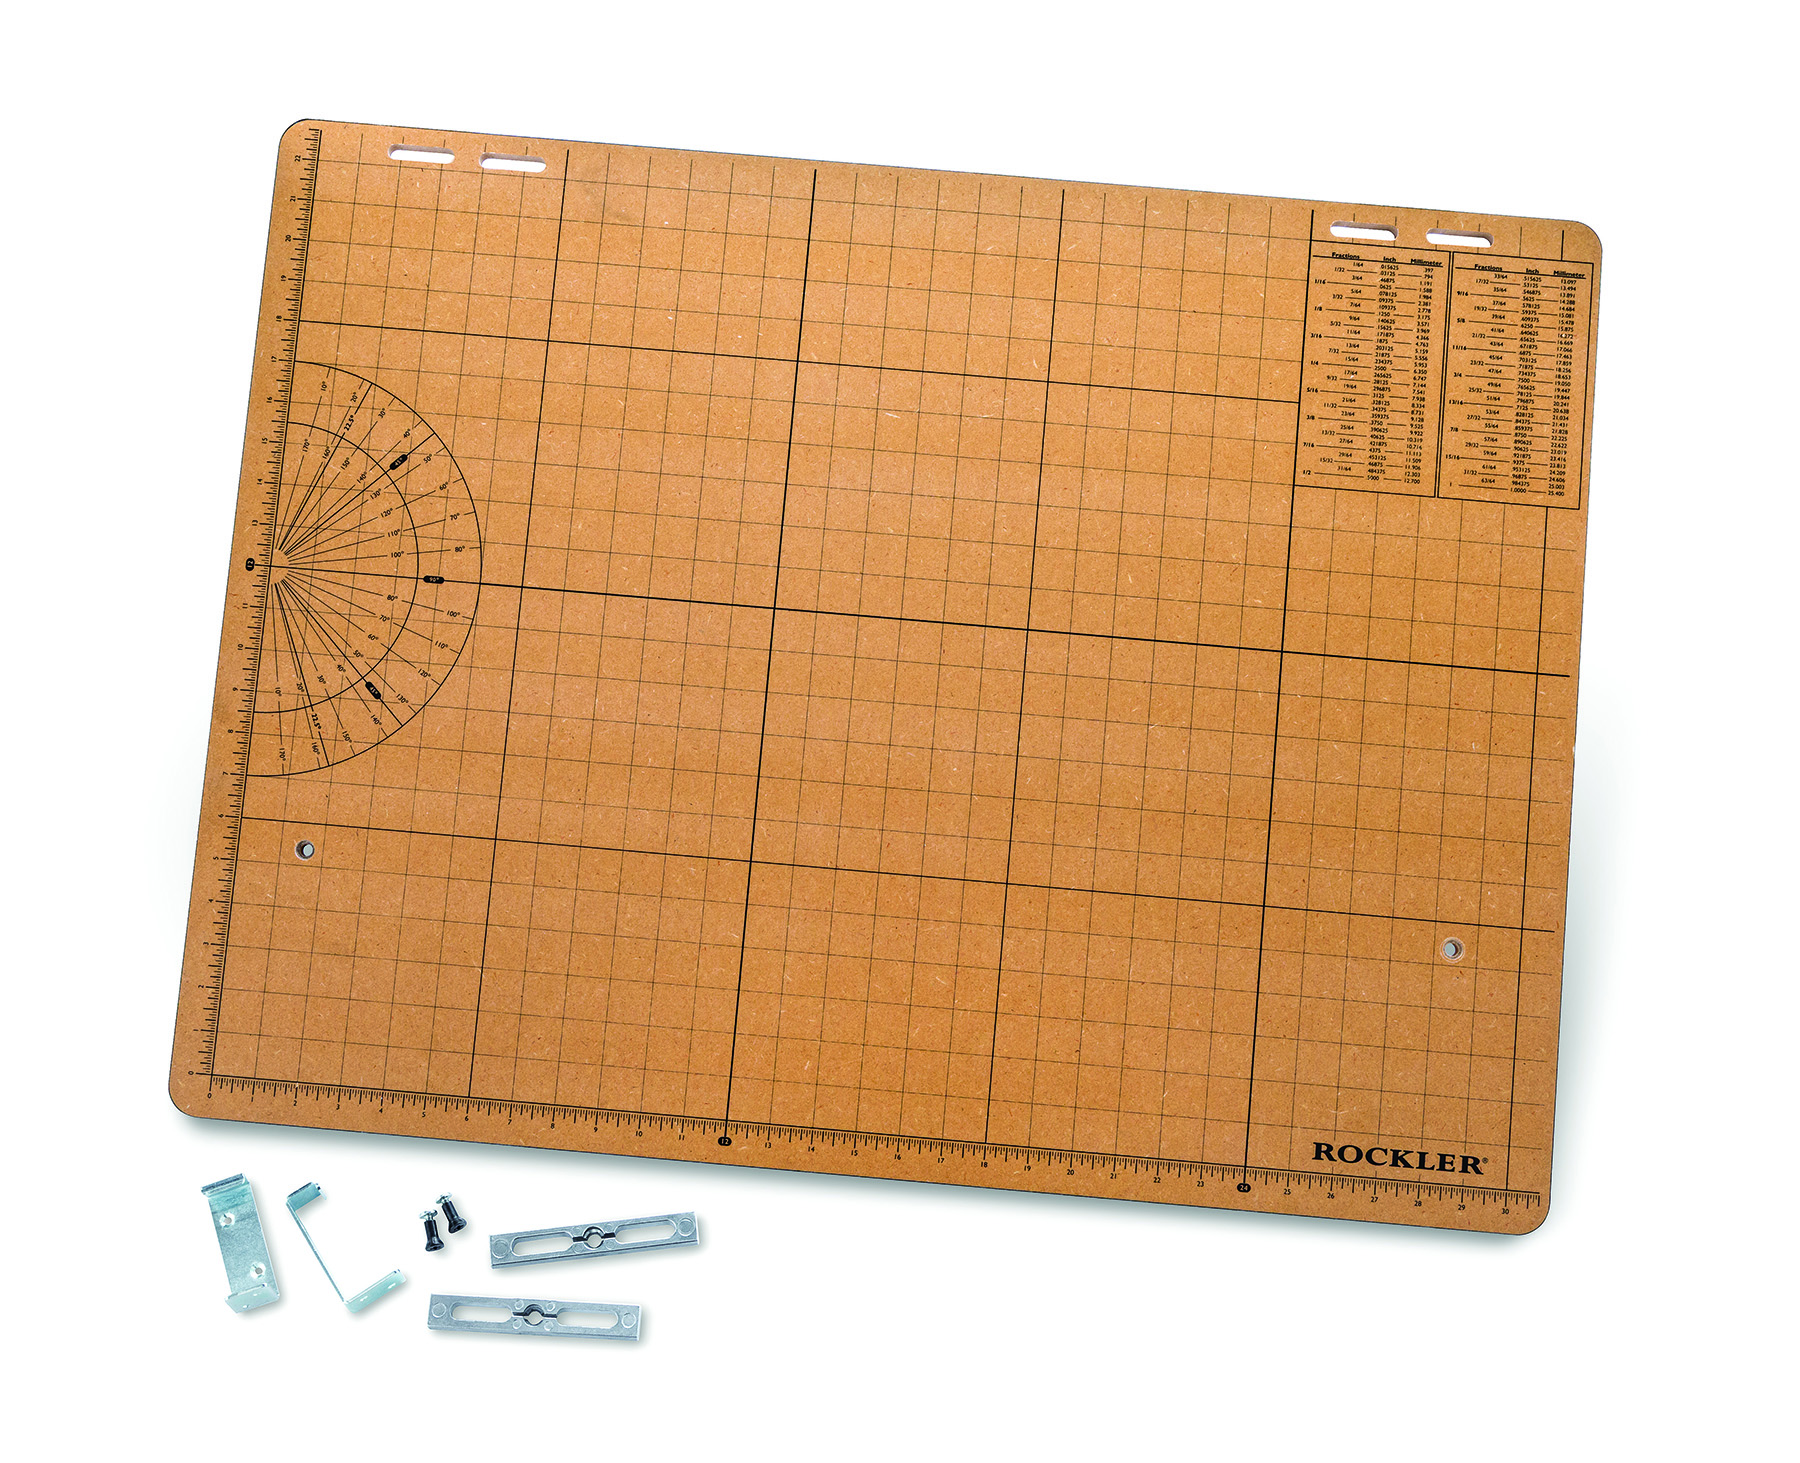 The 1'' grid and protractor angles let you eyeball measurements or set a T-bevel gauge.